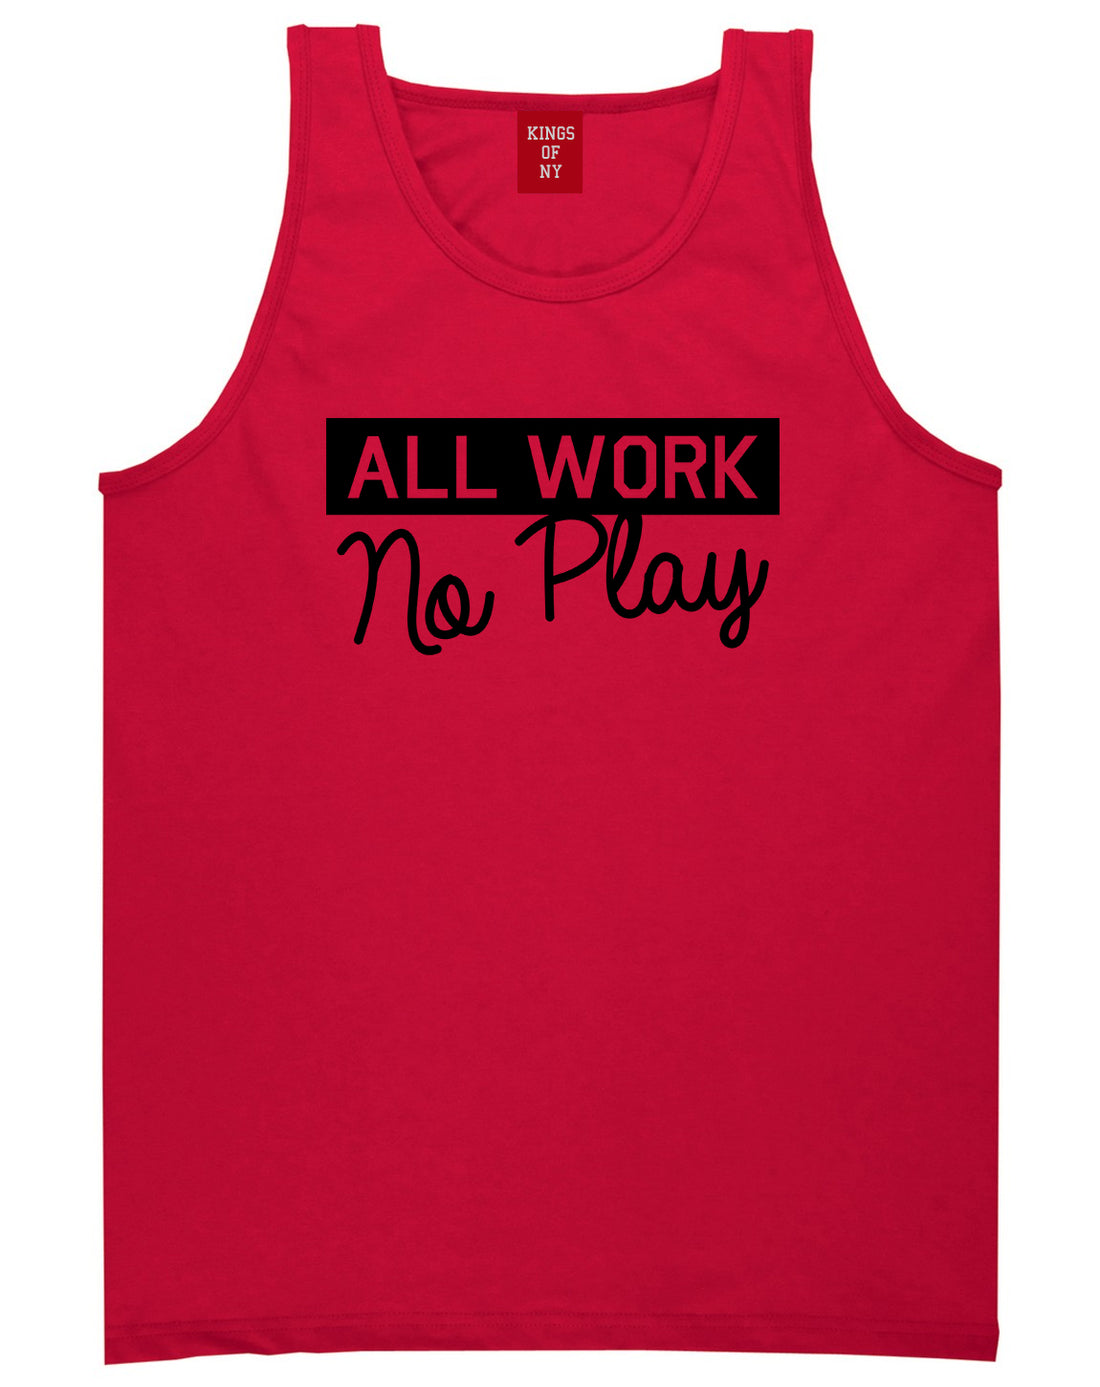 All Work No Play Mens Tank Top T-Shirt Red